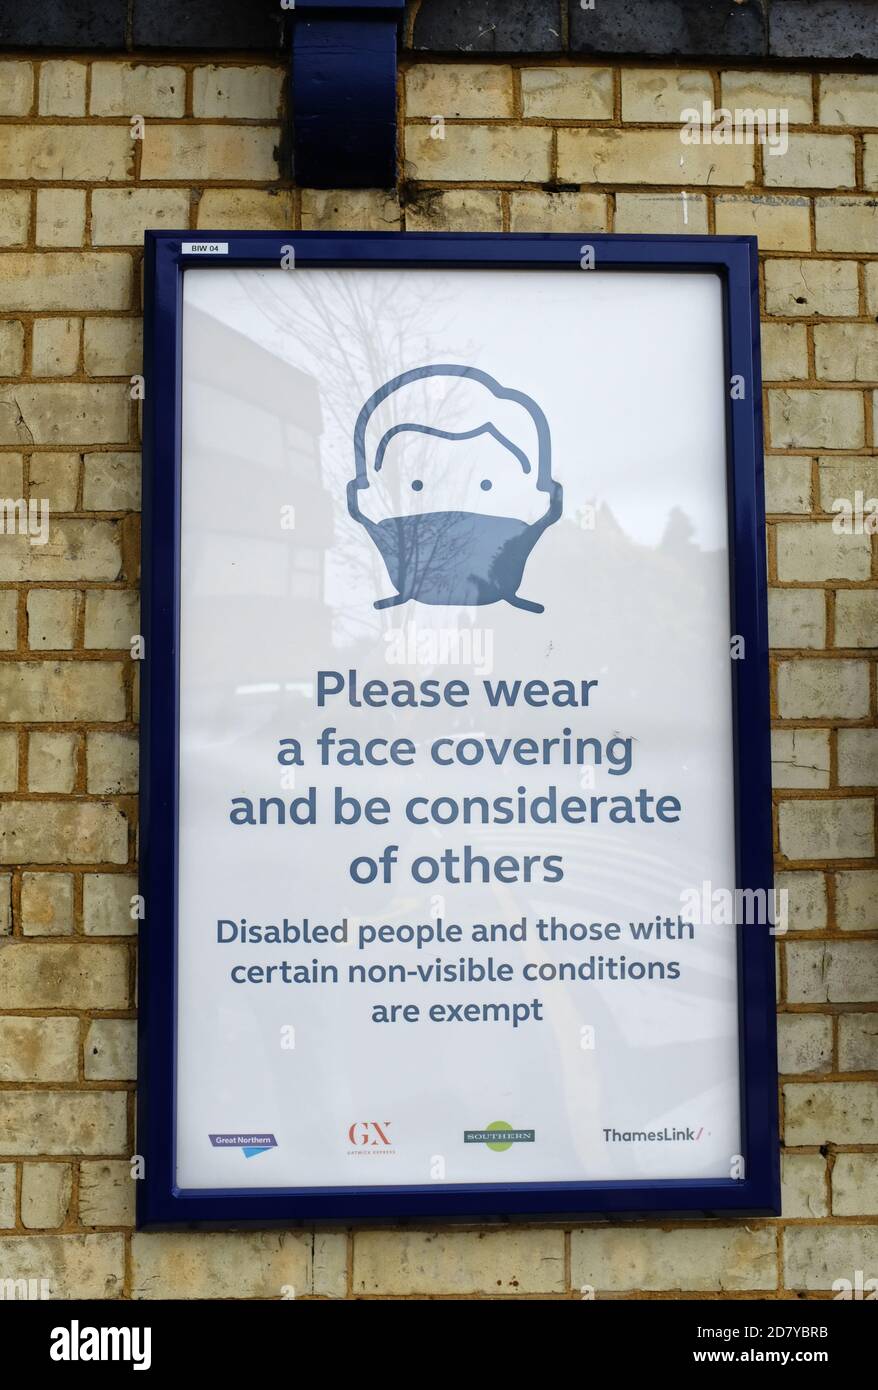 A railway station sign about wearing a face covering on trains, England Stock Photo